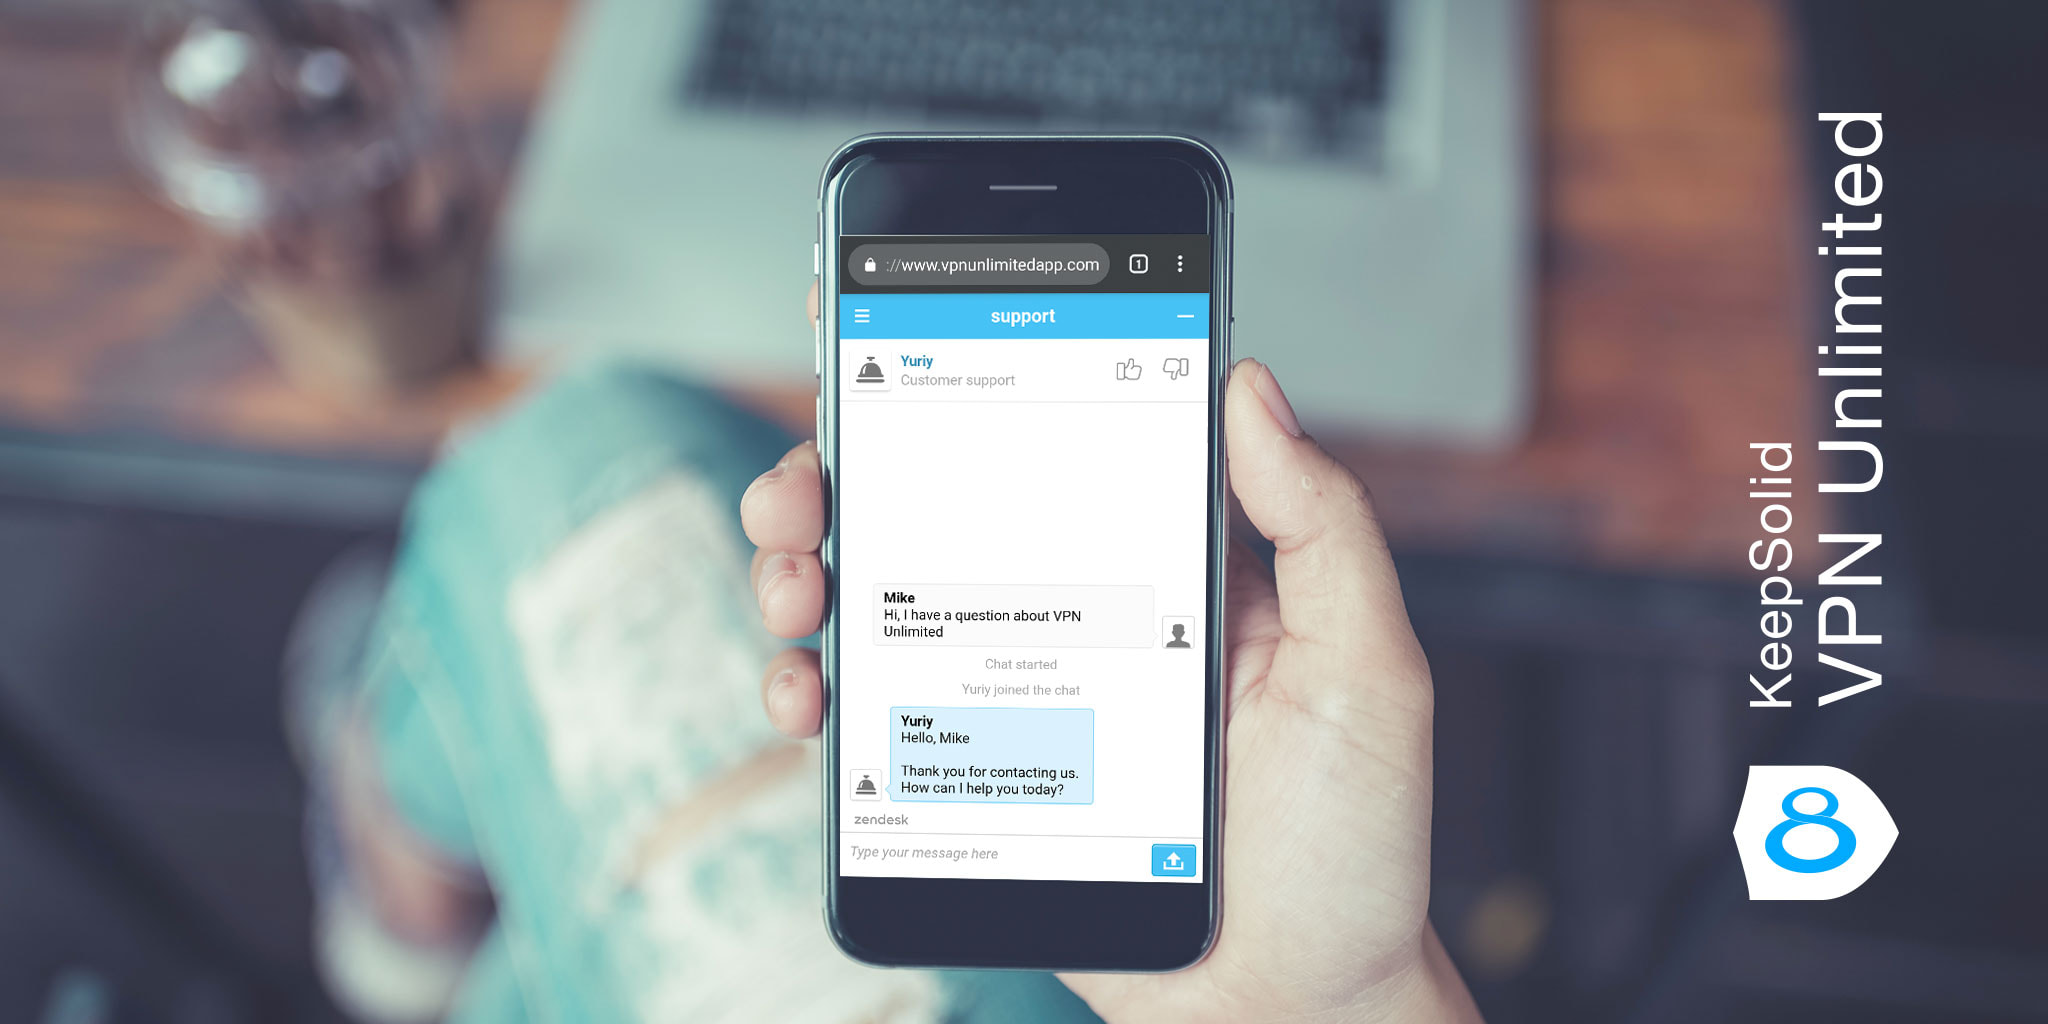 VPN Unlimited Live Chat Support feature